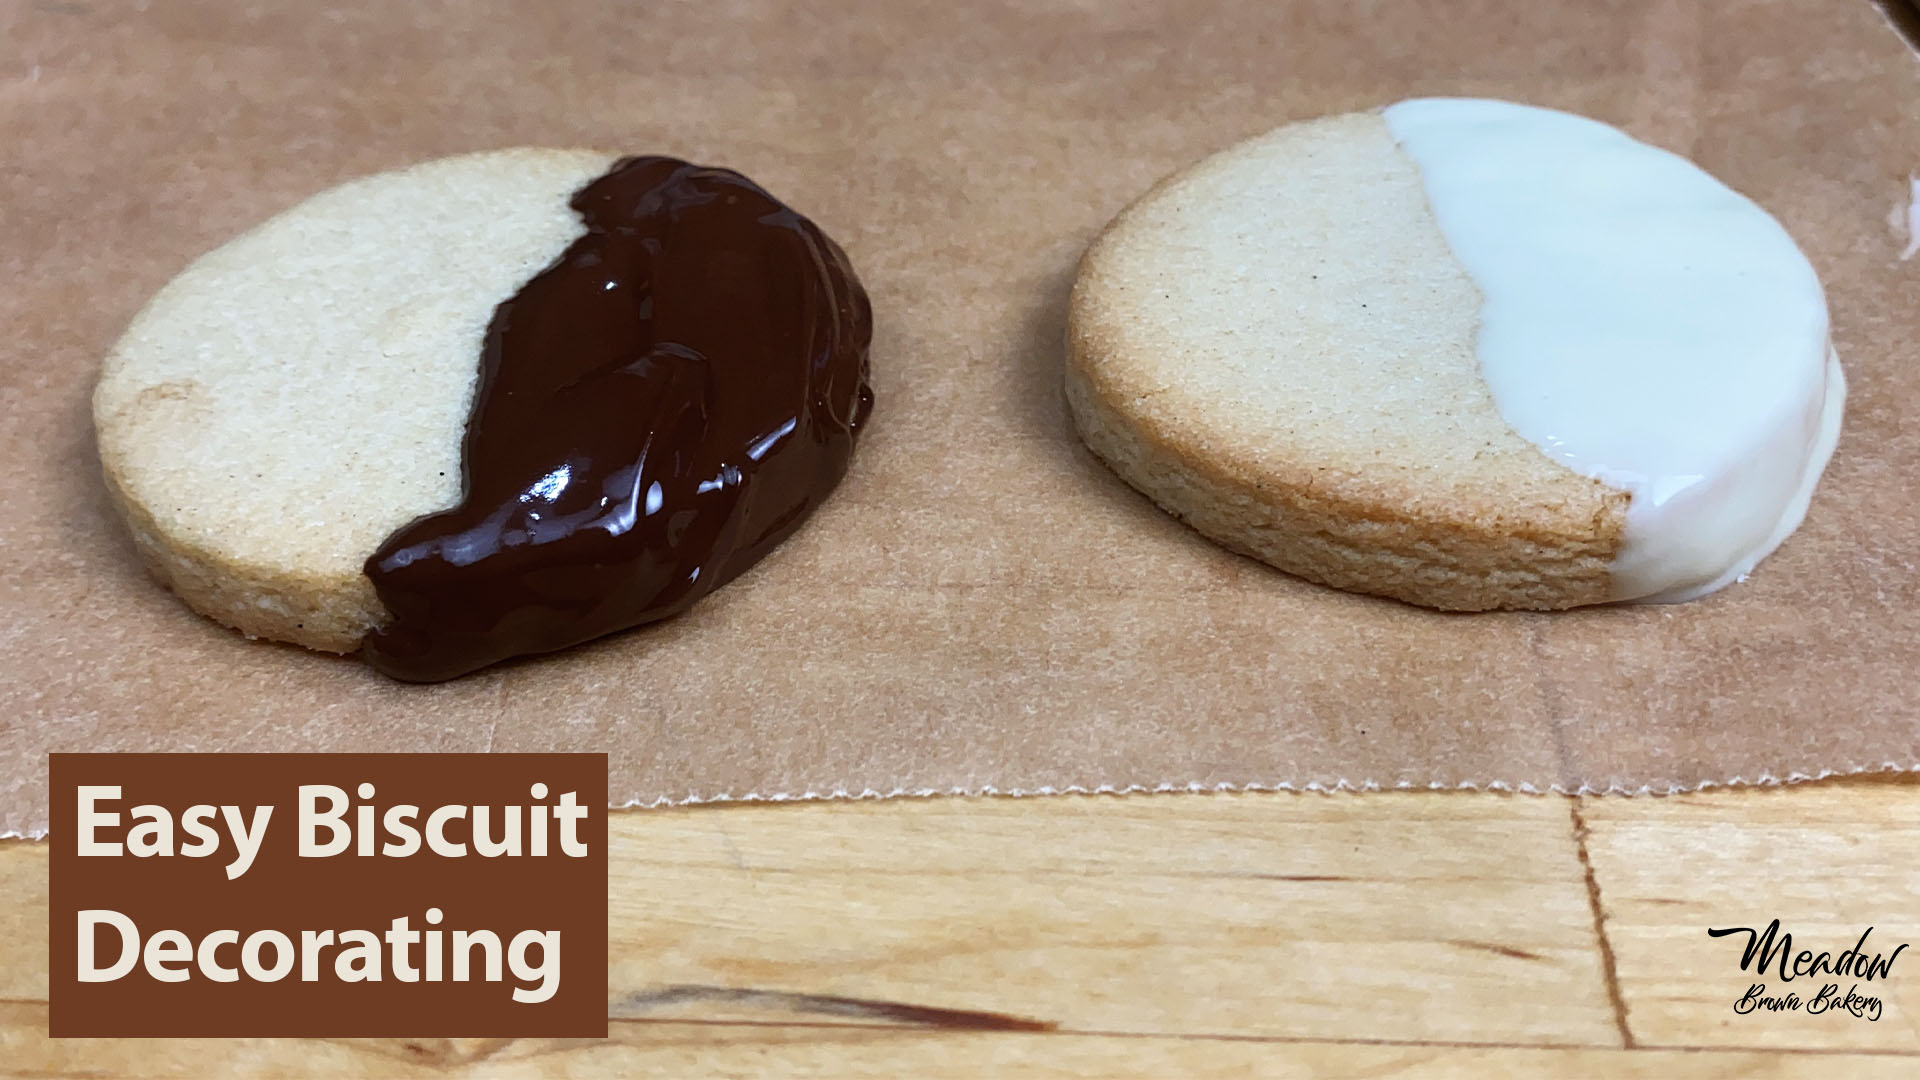 Easy biscuit decorating ideas